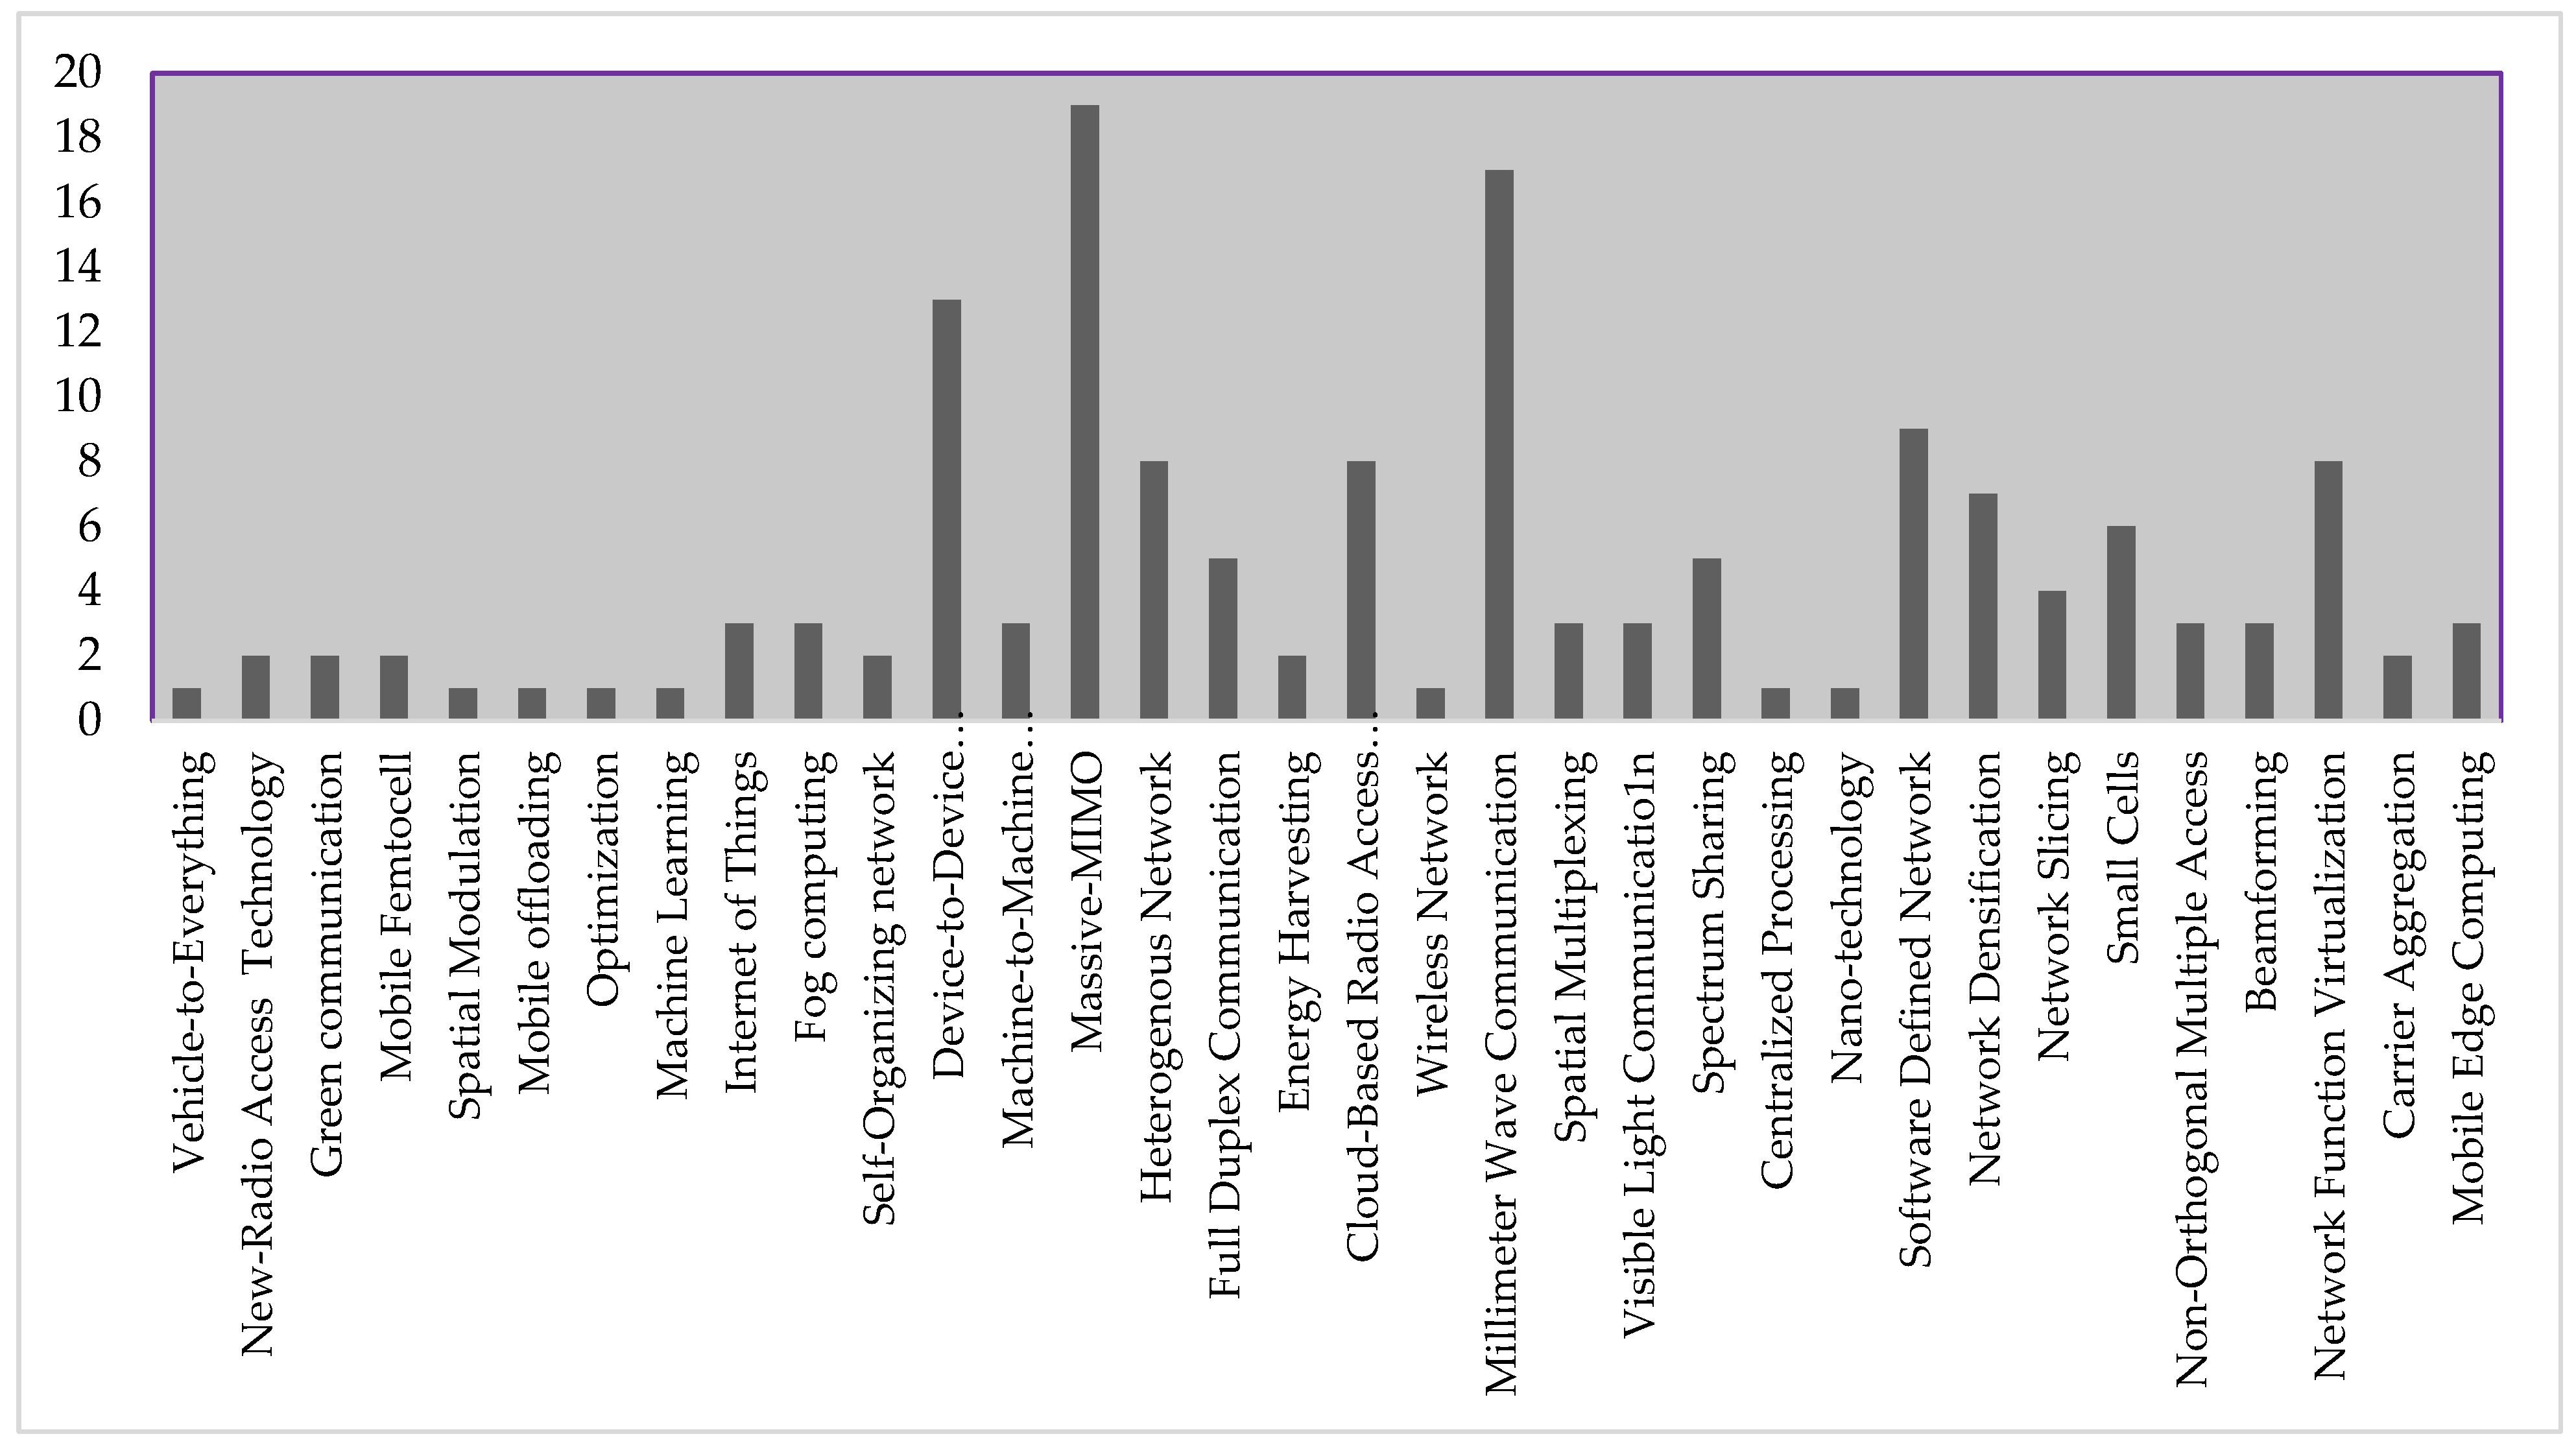 Frequencies and percentages of attachment style as a function of